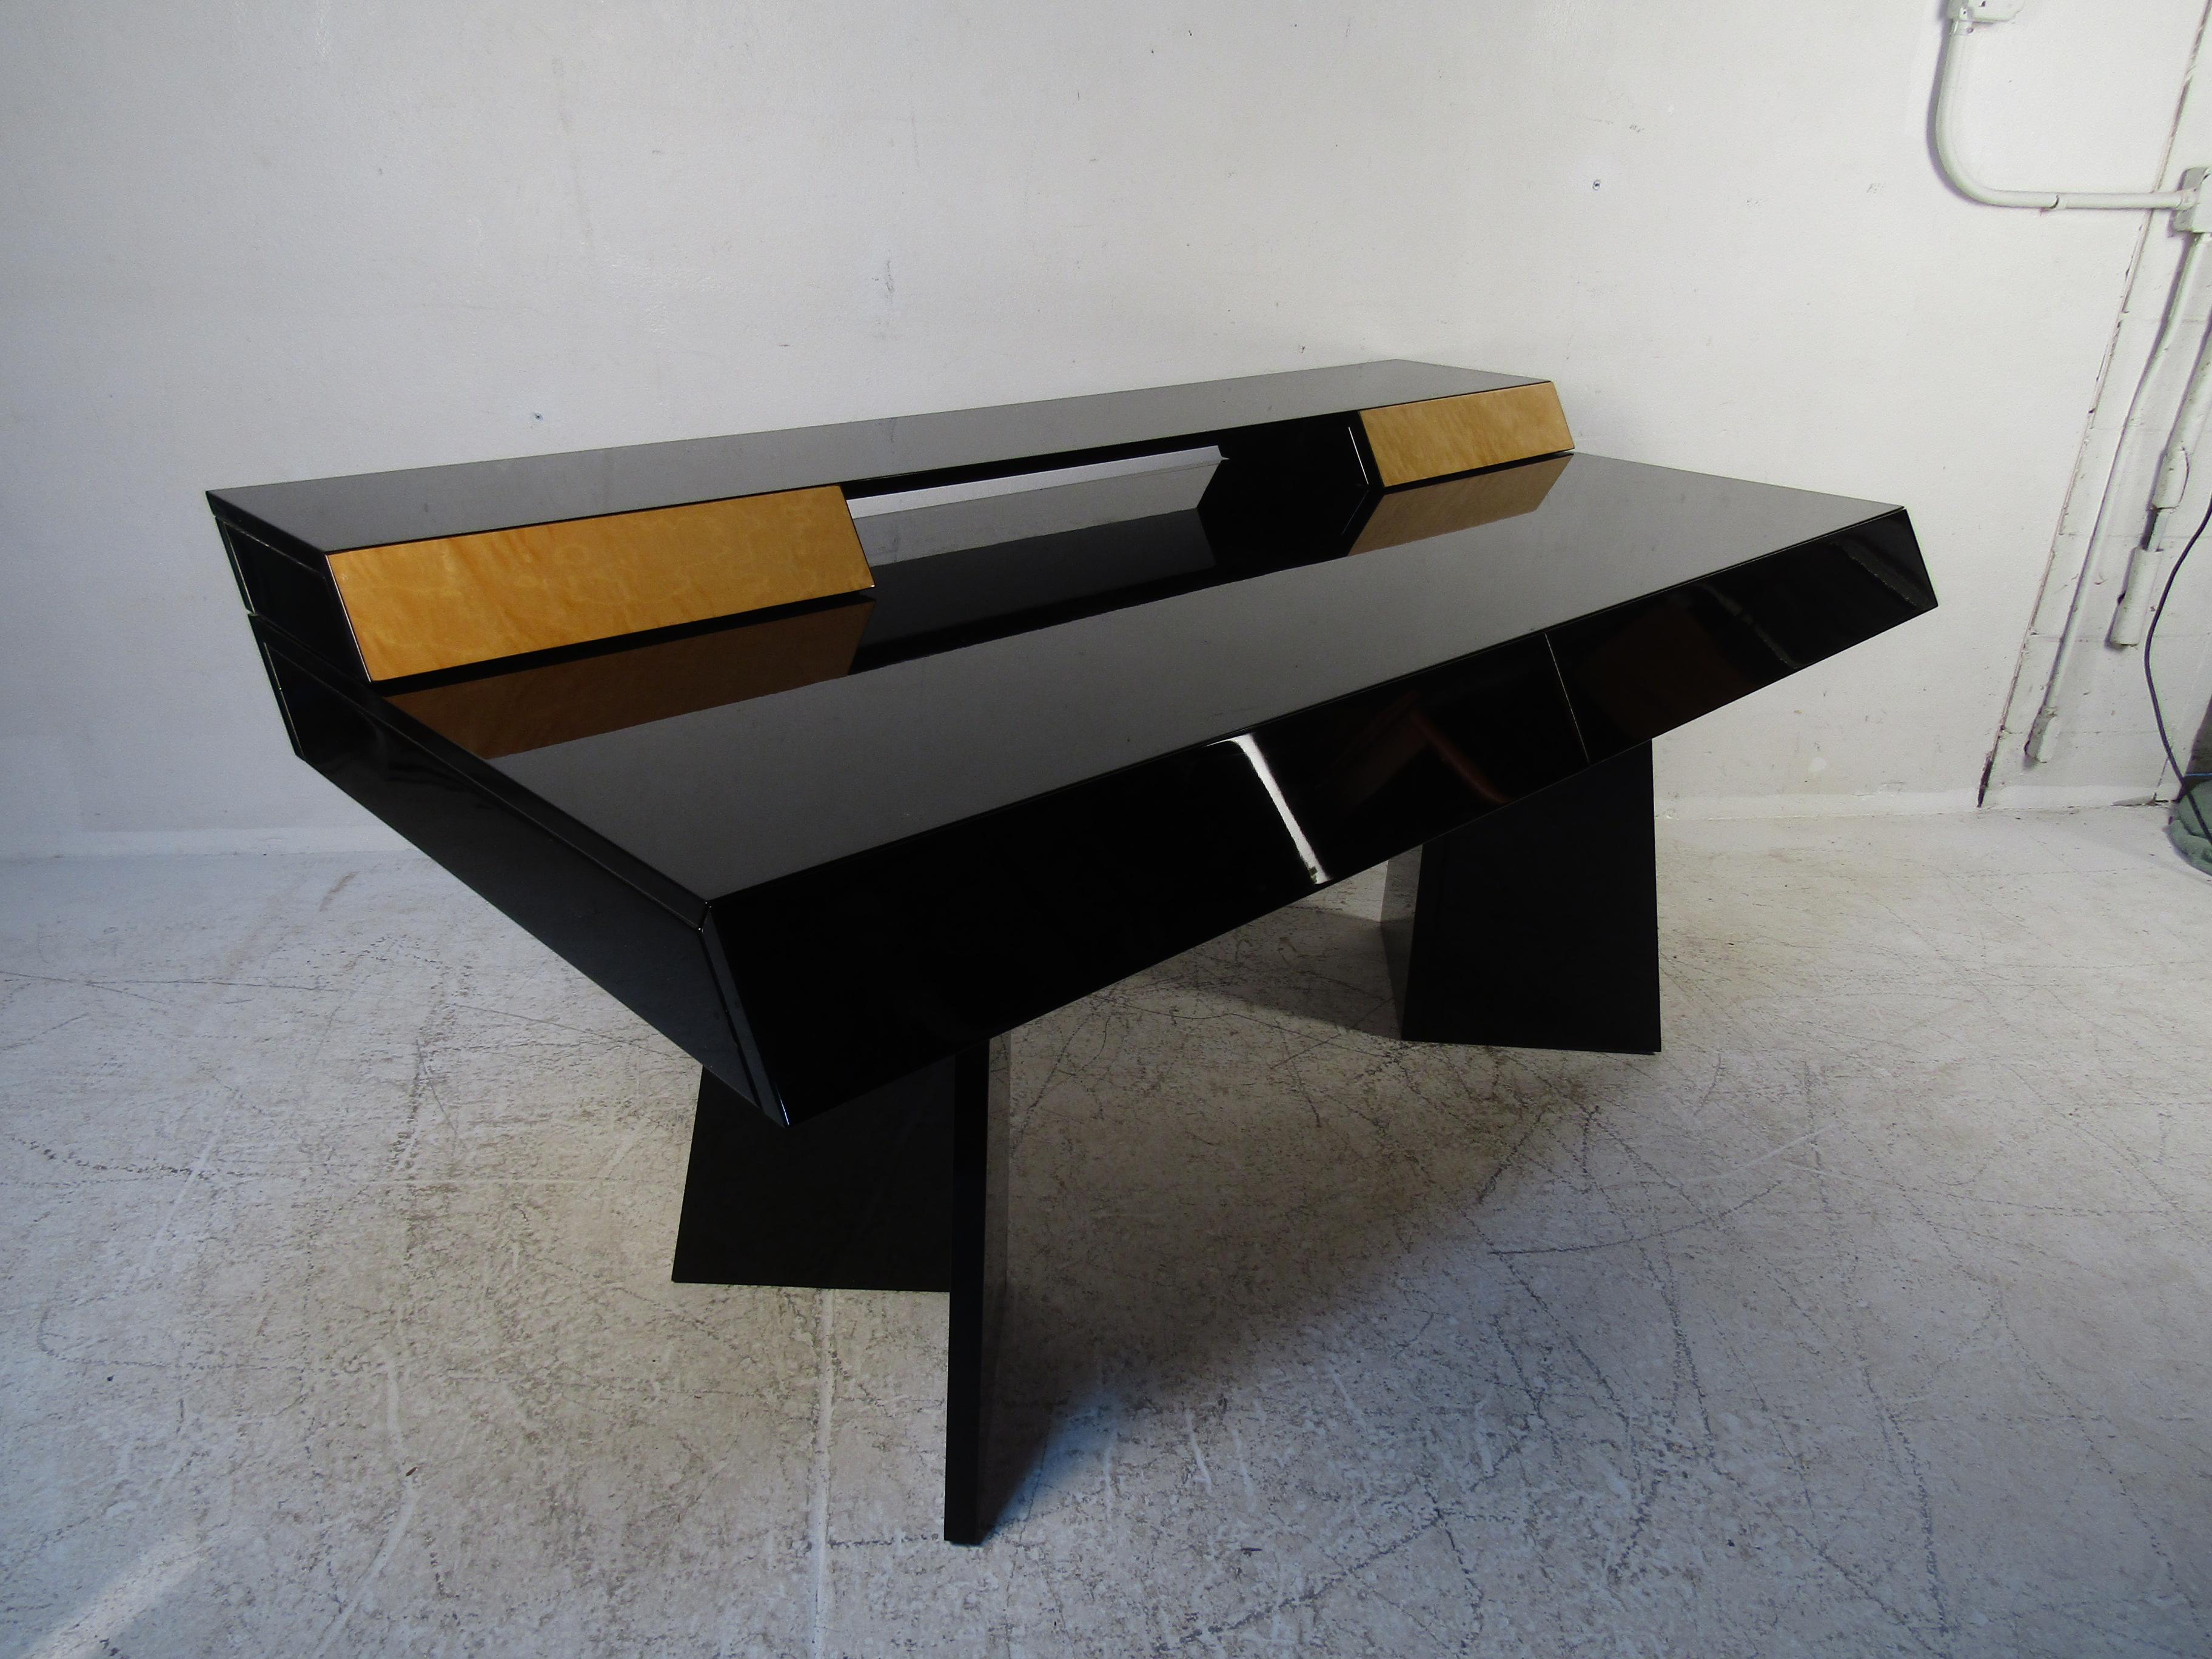 An elegant contemporary modern desk with a black lacquer finish and burl drawer fronts. This ultra-sleek Italian desk has four drawers ensuring plenty of room for storage and workspace. A one of a kind, two-tone desk, that easily blends with any